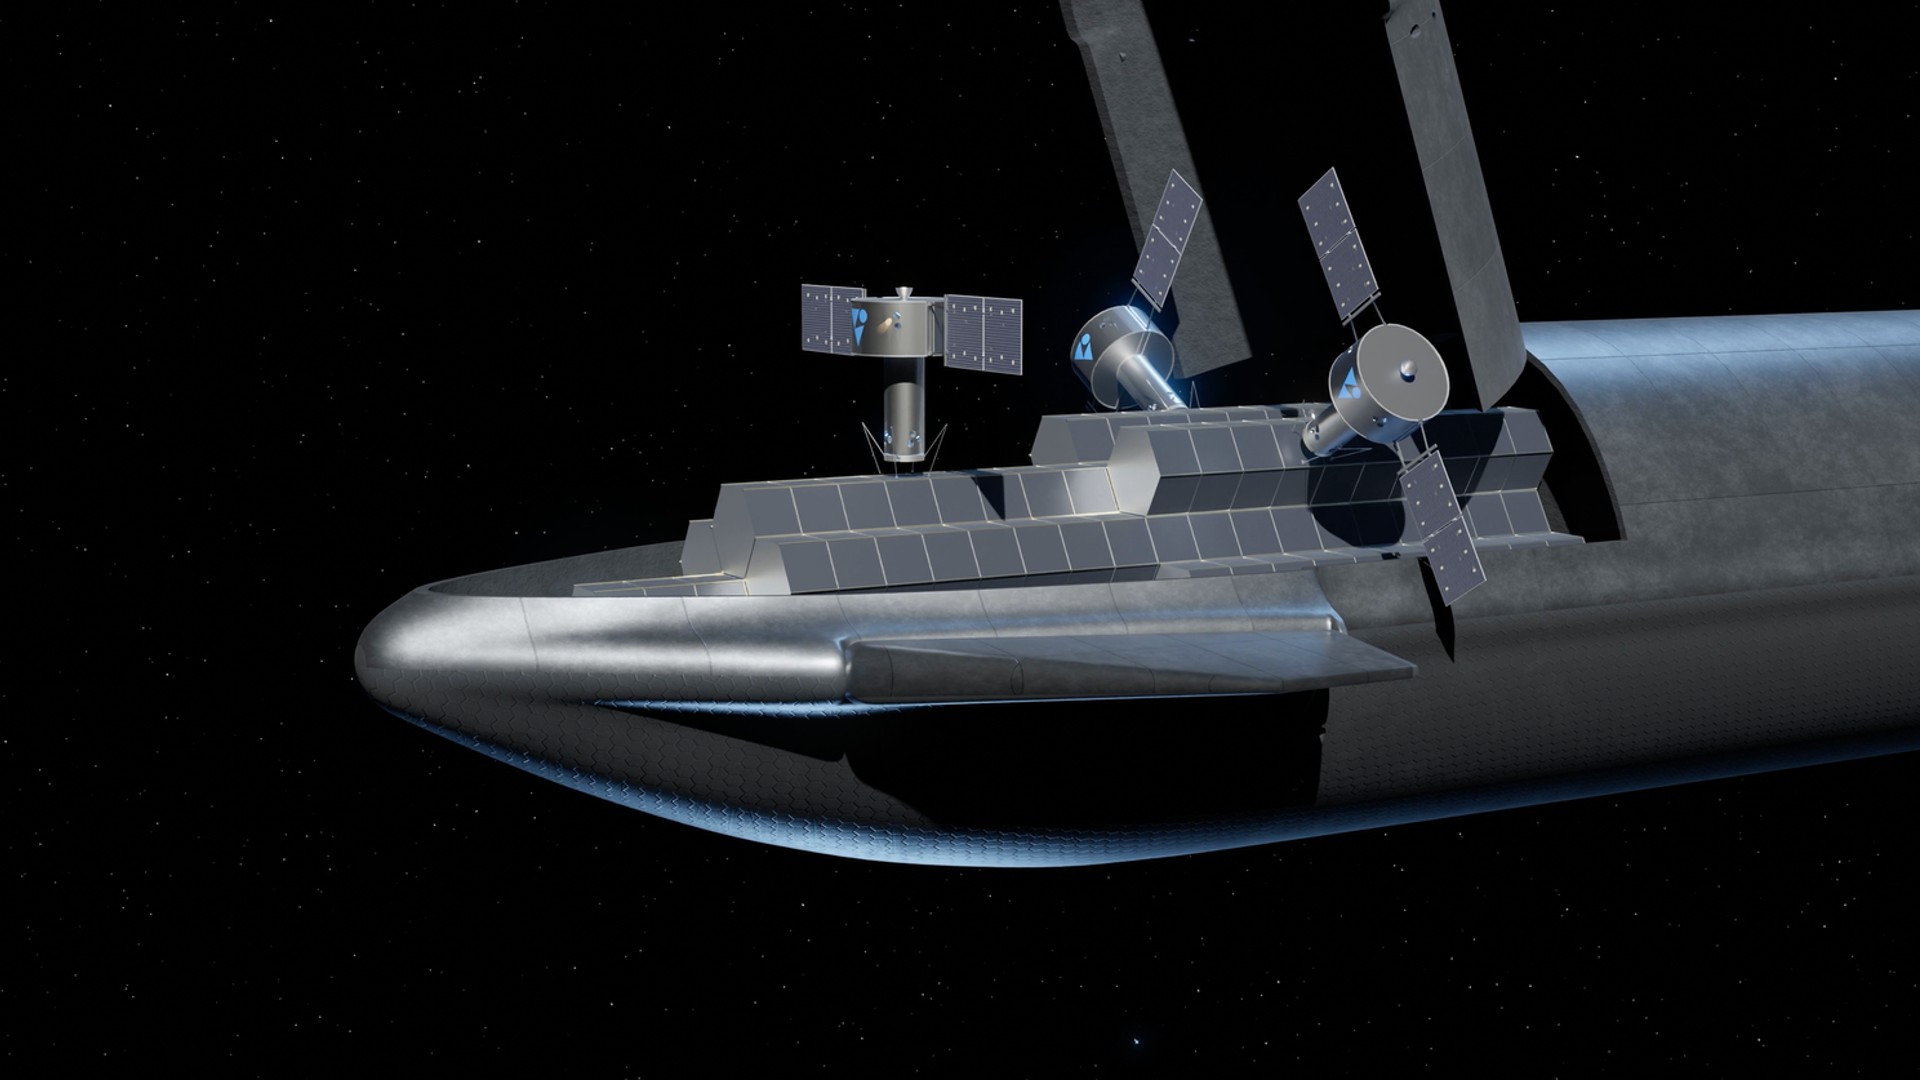 SpaceX's Starship could help this start-up beam clean energy from space. Here's how (video)